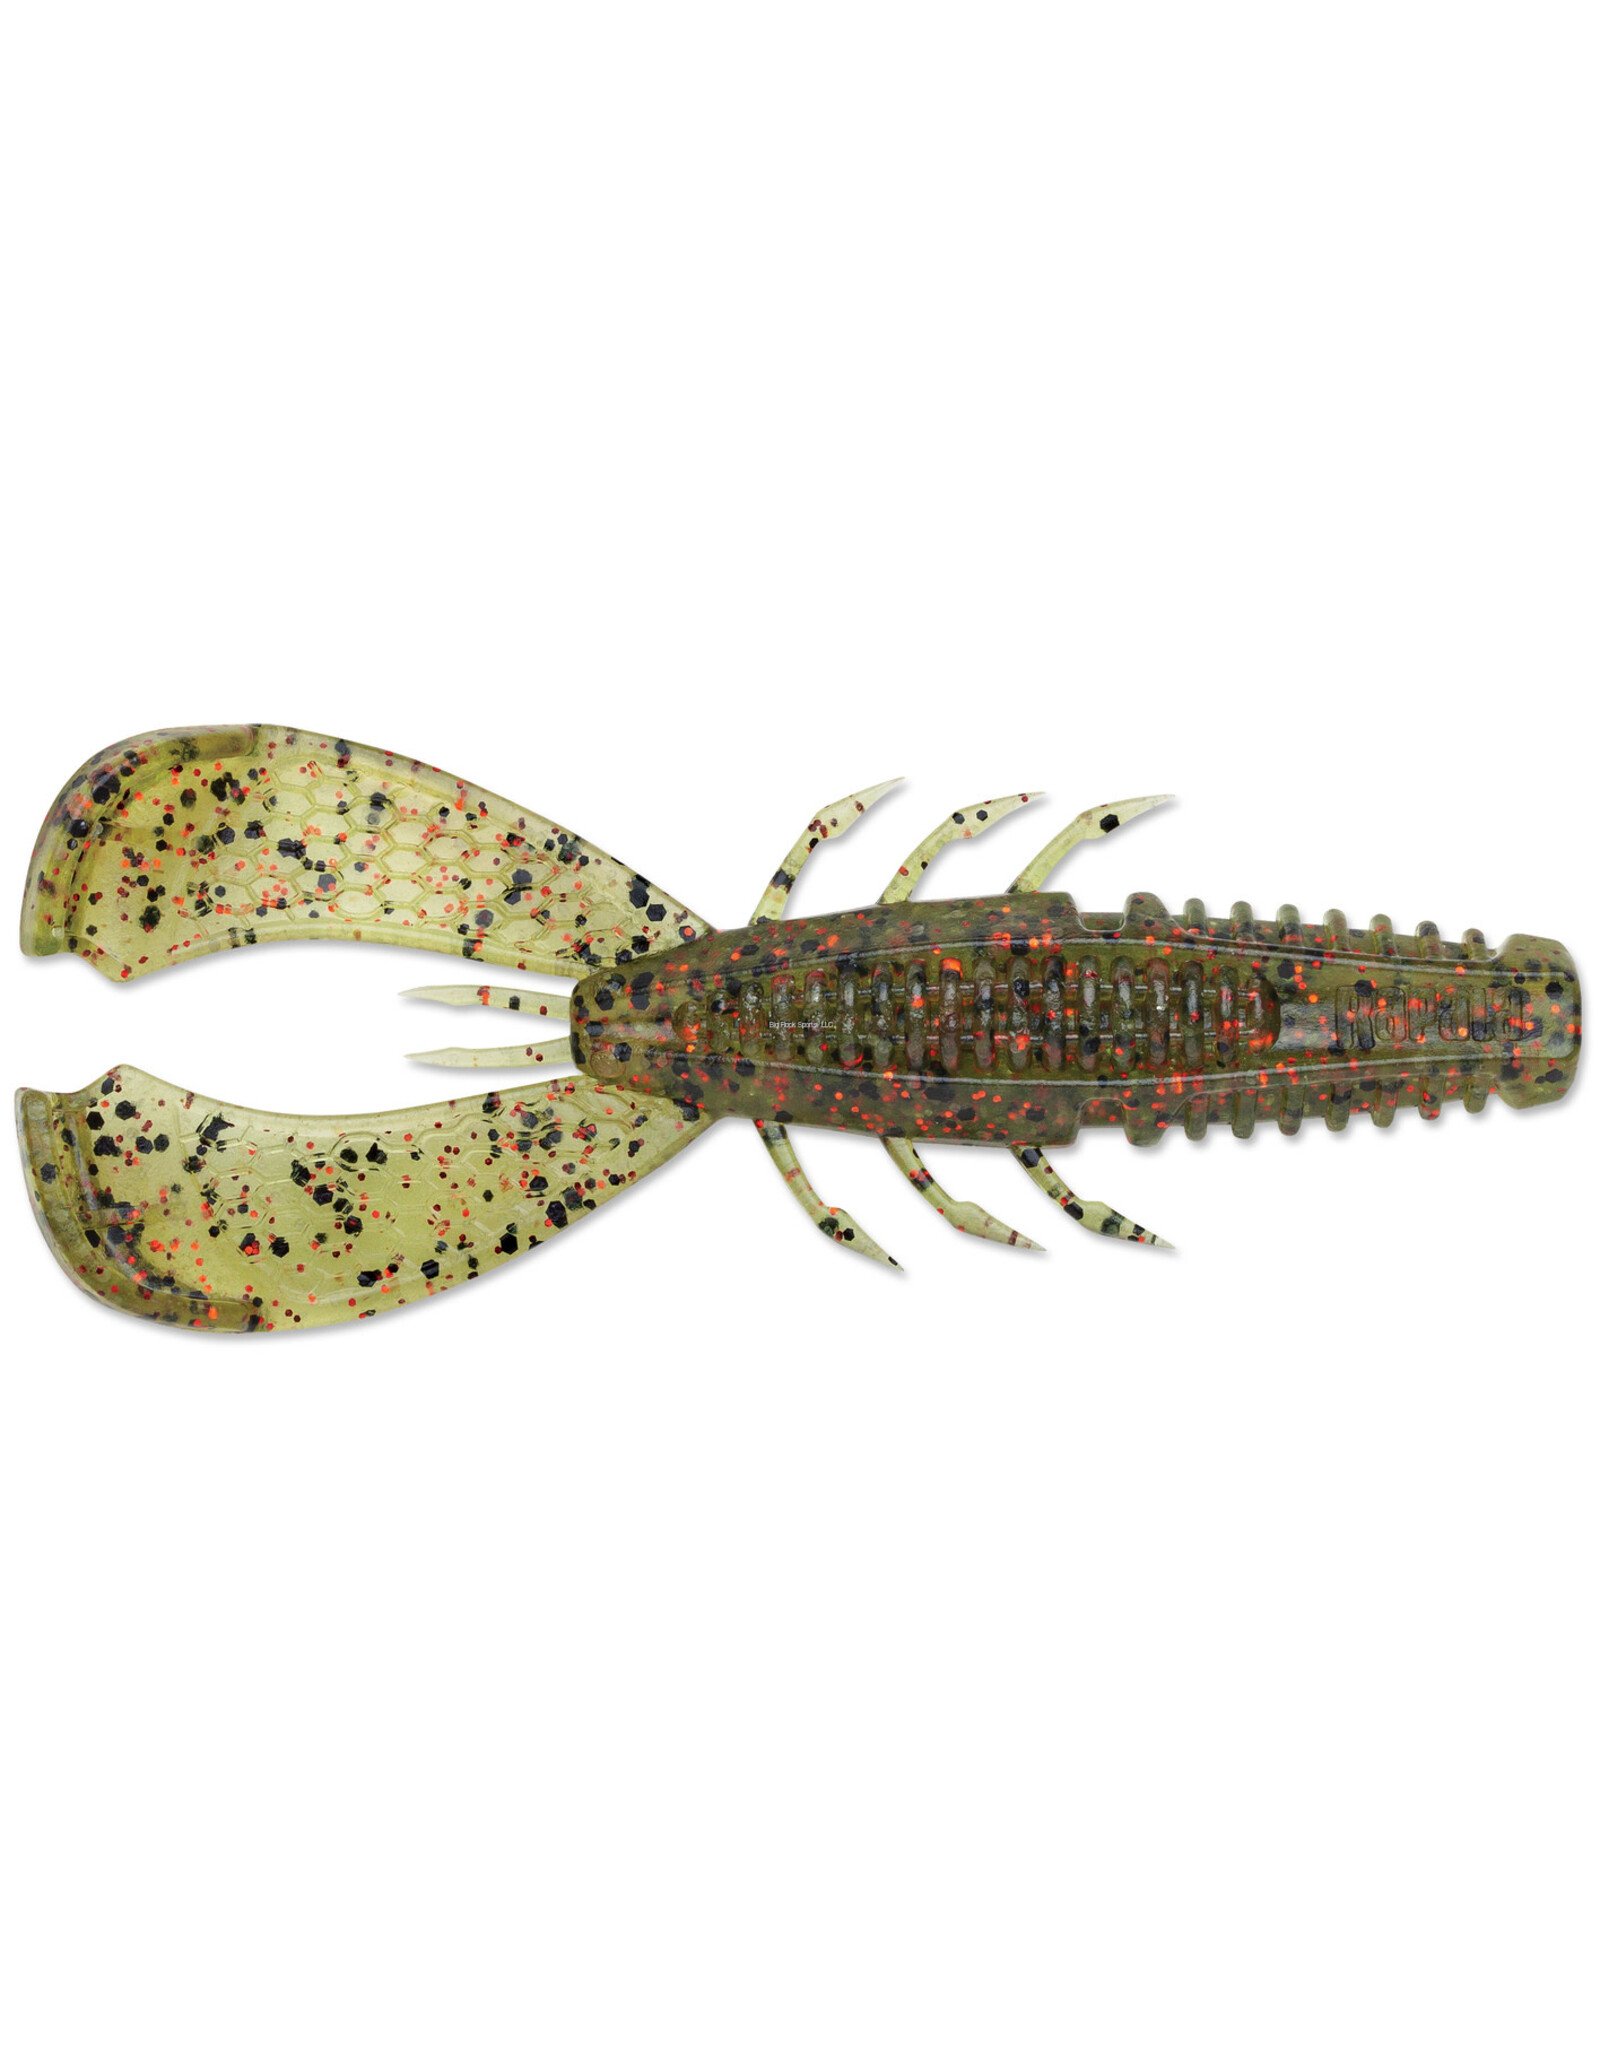 Rapala Rapala CCCLC35WMR CrushCity Cleanup Craw, 3.5", Salt/Scent Infused, 7 Per Package, Watermelon Red